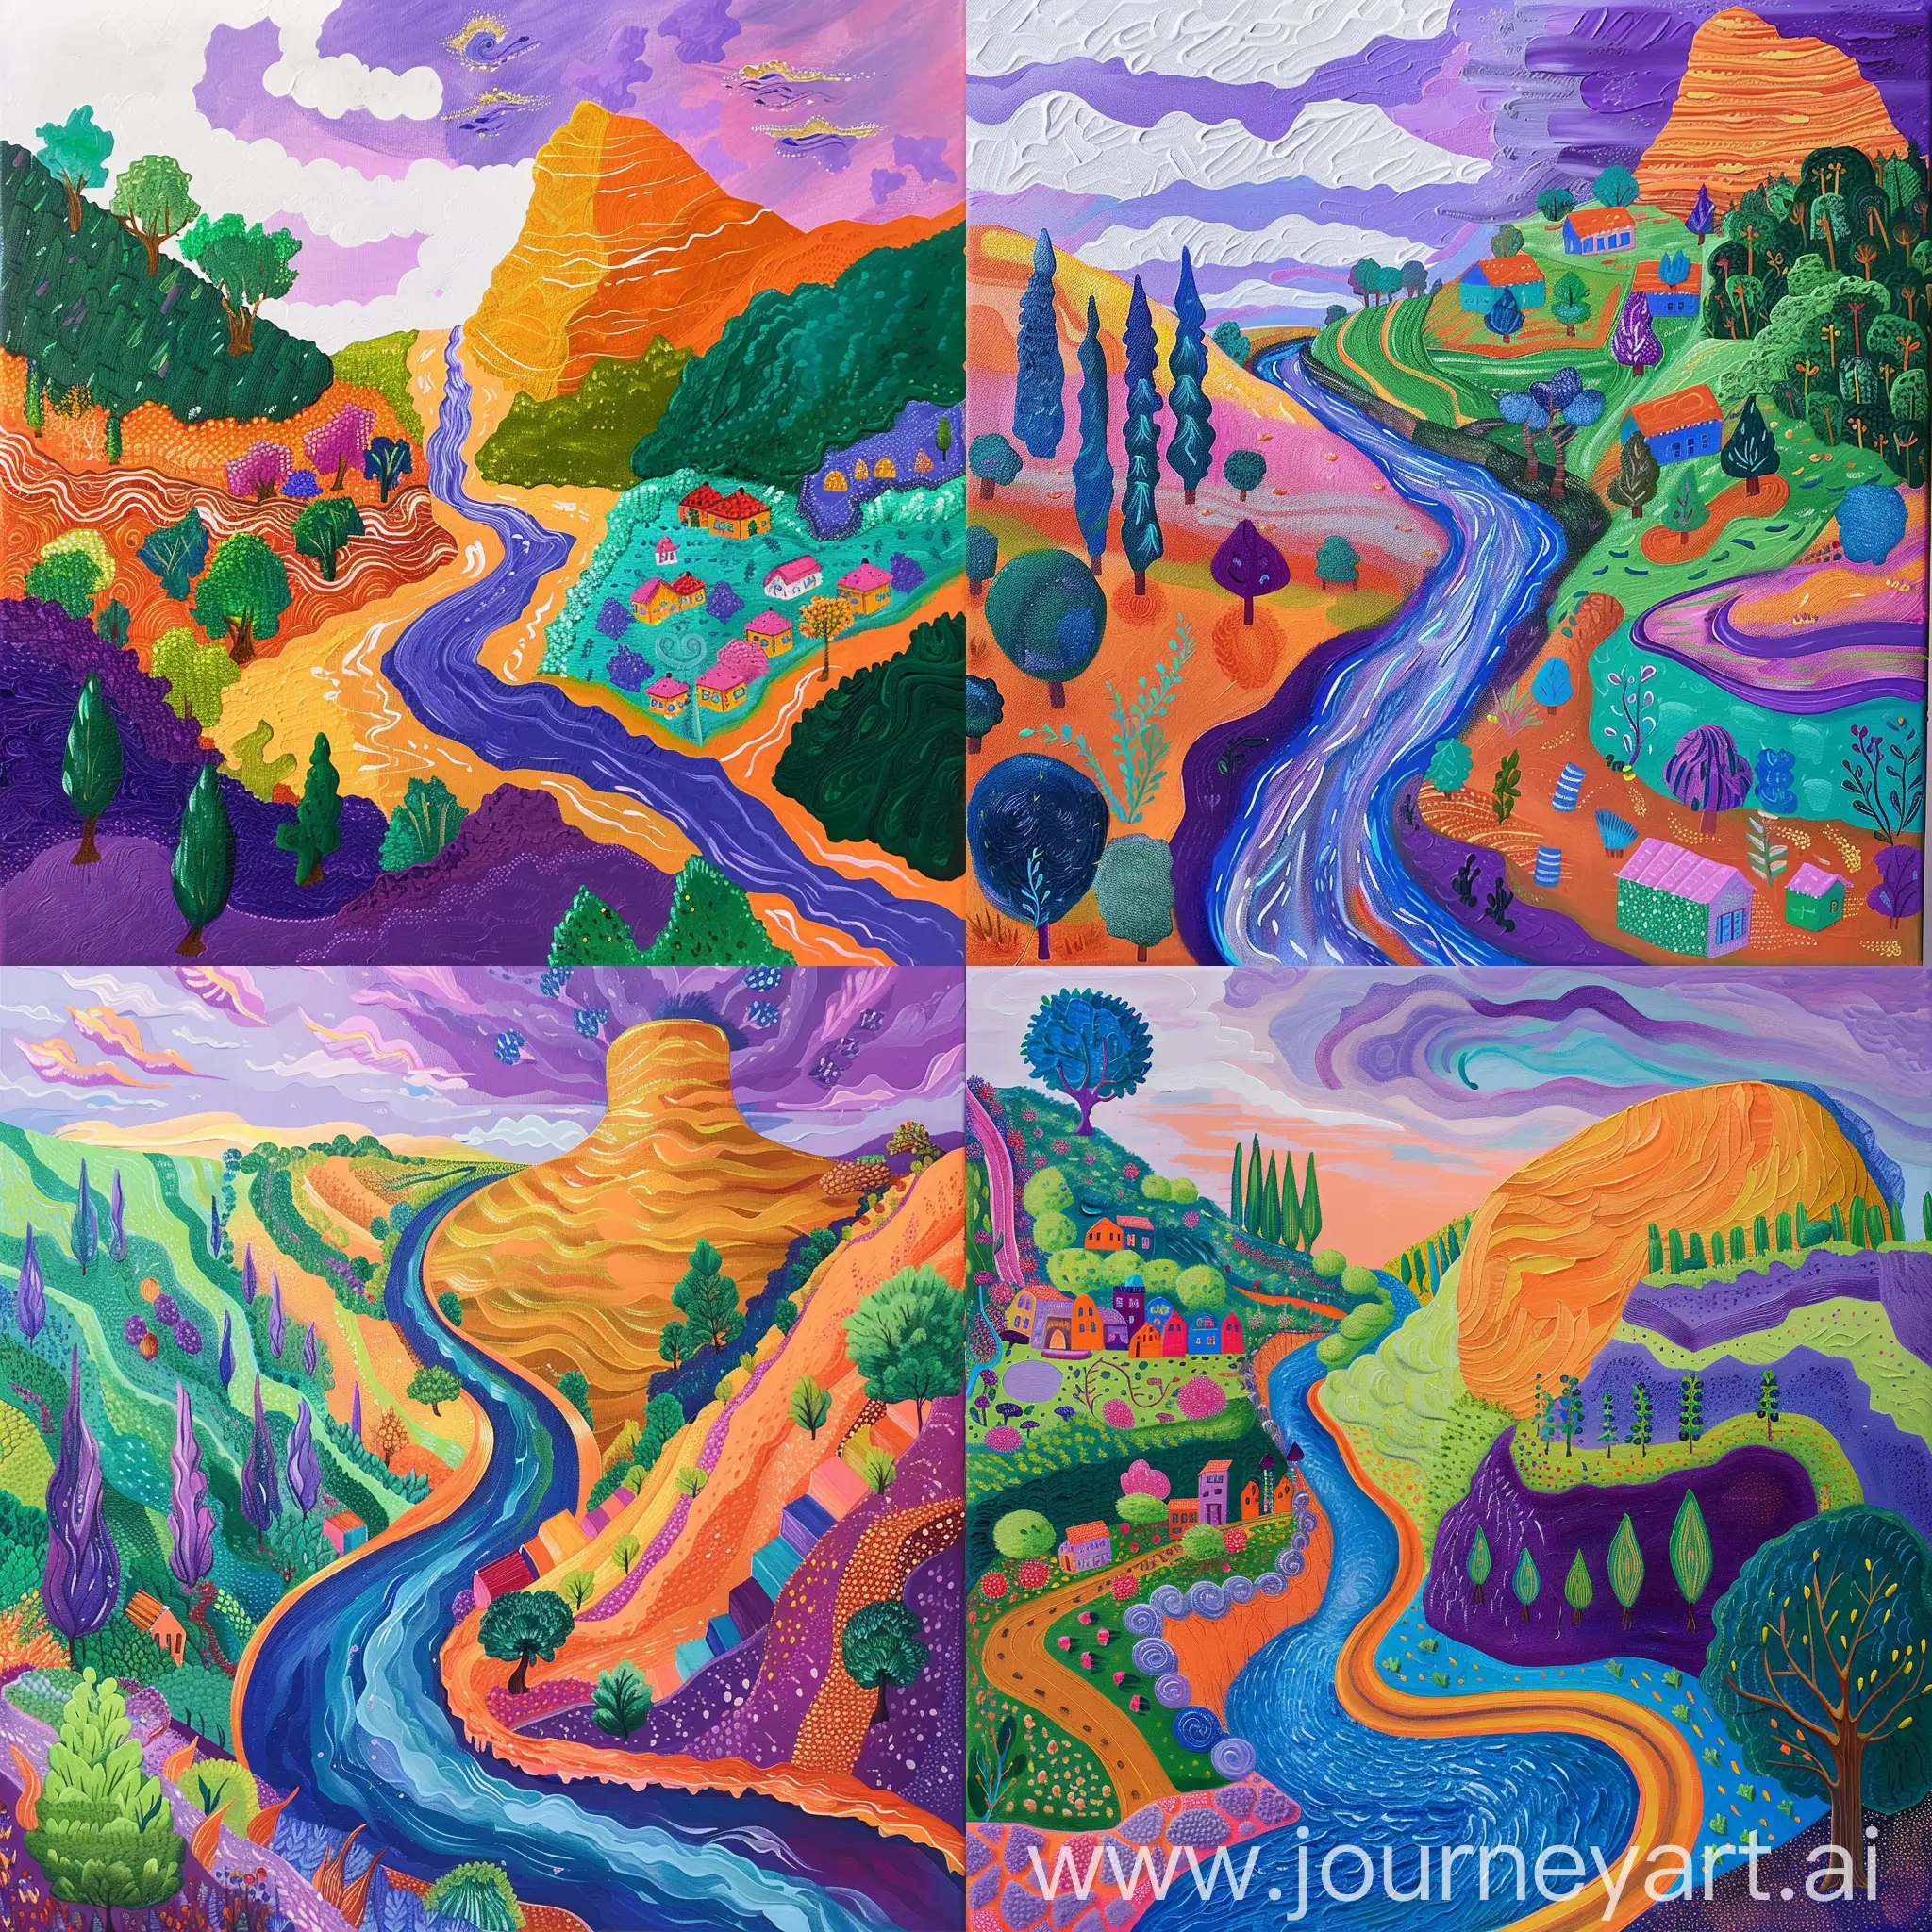 Create a vibrant and colorful painting inspired by the style of "Nichols Canyon" with the same set of colors. Imagine a landscape scene that is expressive and somewhat abstract, using bold and bright colors throughout.

Picture a winding river or road as the focal point of the composition, surrounded by various forms of vegetation and trees. On one side of the river, include a steep green hill or cliff with trees or bushes, while the other side features a flatter landscape with small colorful buildings resembling a village.

Incorporate a large, rounded hill or mountain in the background, painted in a warm orange hue. Use a mix of purple and blue for the sky, with white strokes to represent clouds. Experiment with patterns and textures to add depth and visual interest to the painting.

Remember to maintain the whimsical and dream-like quality of the original artwork while infusing your own creativity and interpretation. Use acrylic paint on a canvas to capture the essence of the style and create a unique piece inspired by "Nichols Canyon."